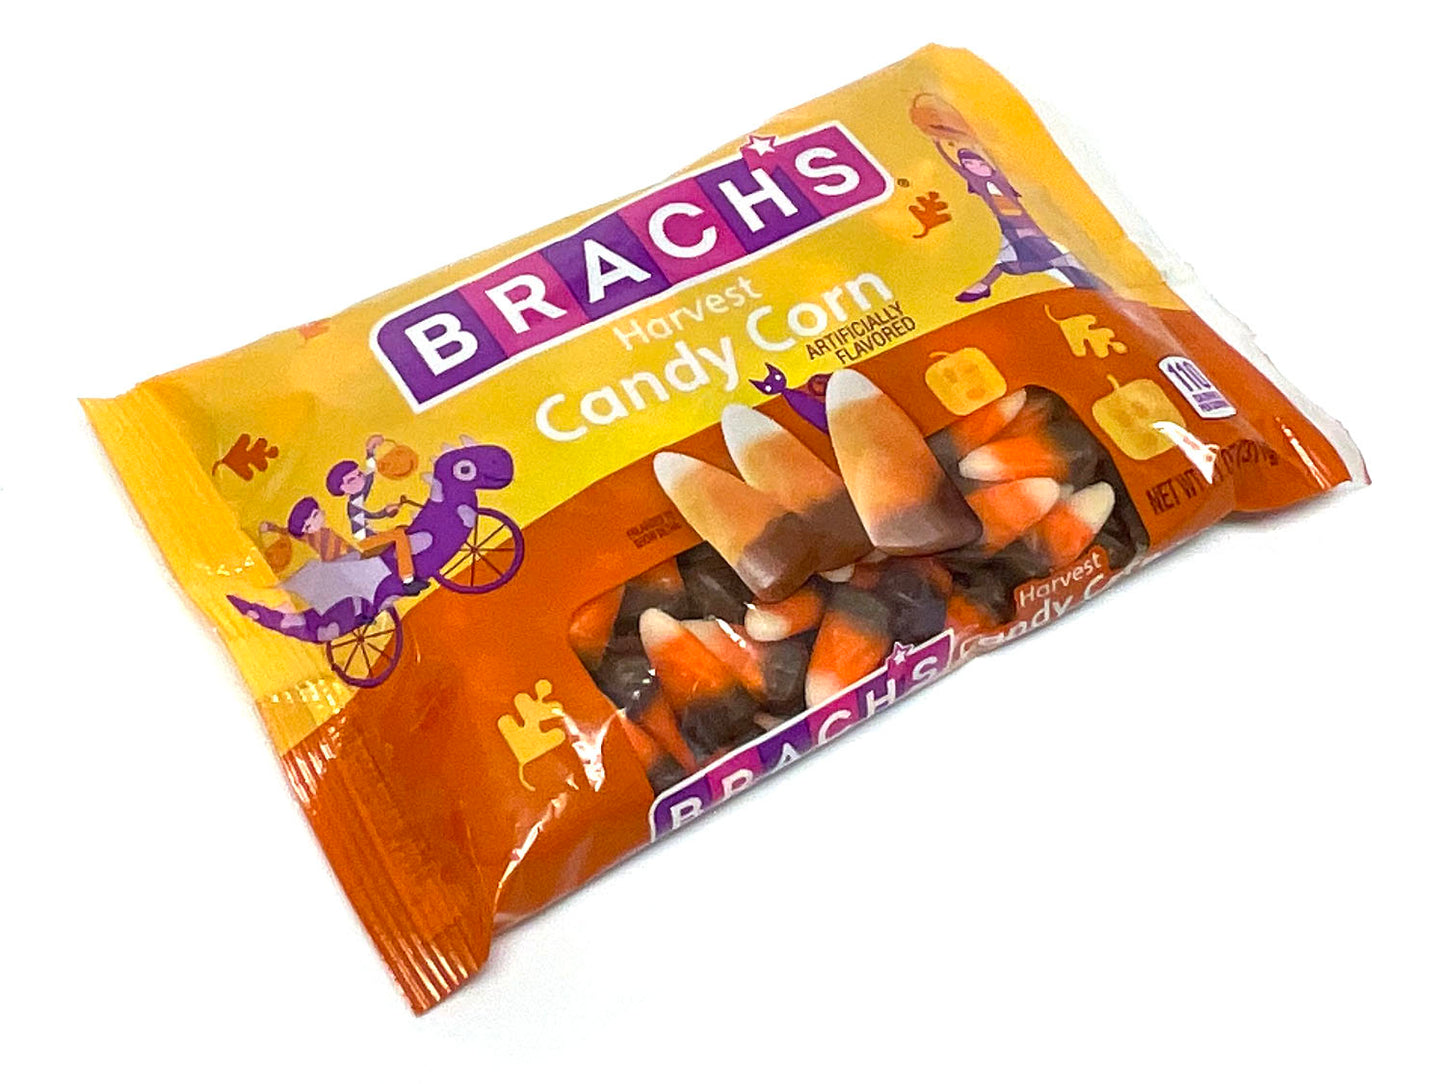 Brachs Candy Corn, Big Bag, Candles and Incense